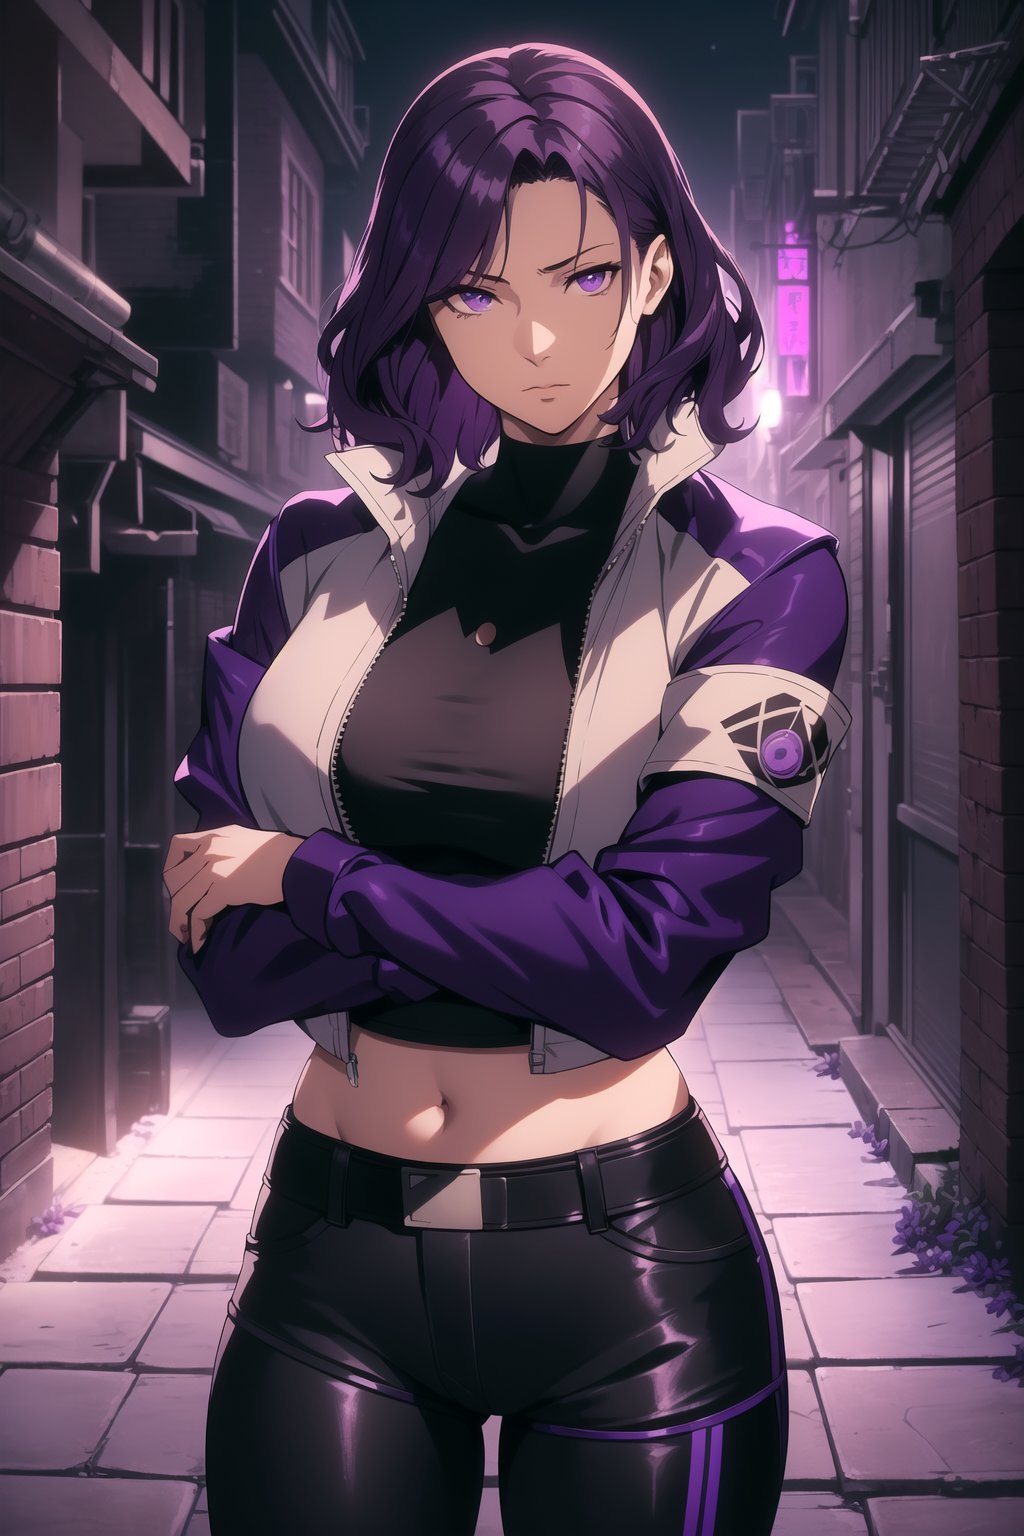 (Masterpiece, Best Quality), (A Rebel 25-Year-Old Japanese Female Resistance Leader), (Short Wavy Violet Hair:1.4), (Dark Purple Eyes), (Fair Skin:1.2), (Wearing Violet Resistance Member Jacket, Black Crop Top and Black Tight Pants:1.4), (Dystopian Rural City Alleyway at Night:1.4), (Crossed Arms Pose:1.4), Centered, (Half Body Shot:1.4), (From Front Shot:1.4), Insane Details, Intricate Face Detail, Intricate Hand Details, Cinematic Shot and Lighting, Realistic and Vibrant Colors, Sharp Focus, Ultra Detailed, Realistic Images, Depth of Field, Incredibly Realistic Environment and Scene, Master Composition and Cinematography,castlevania style